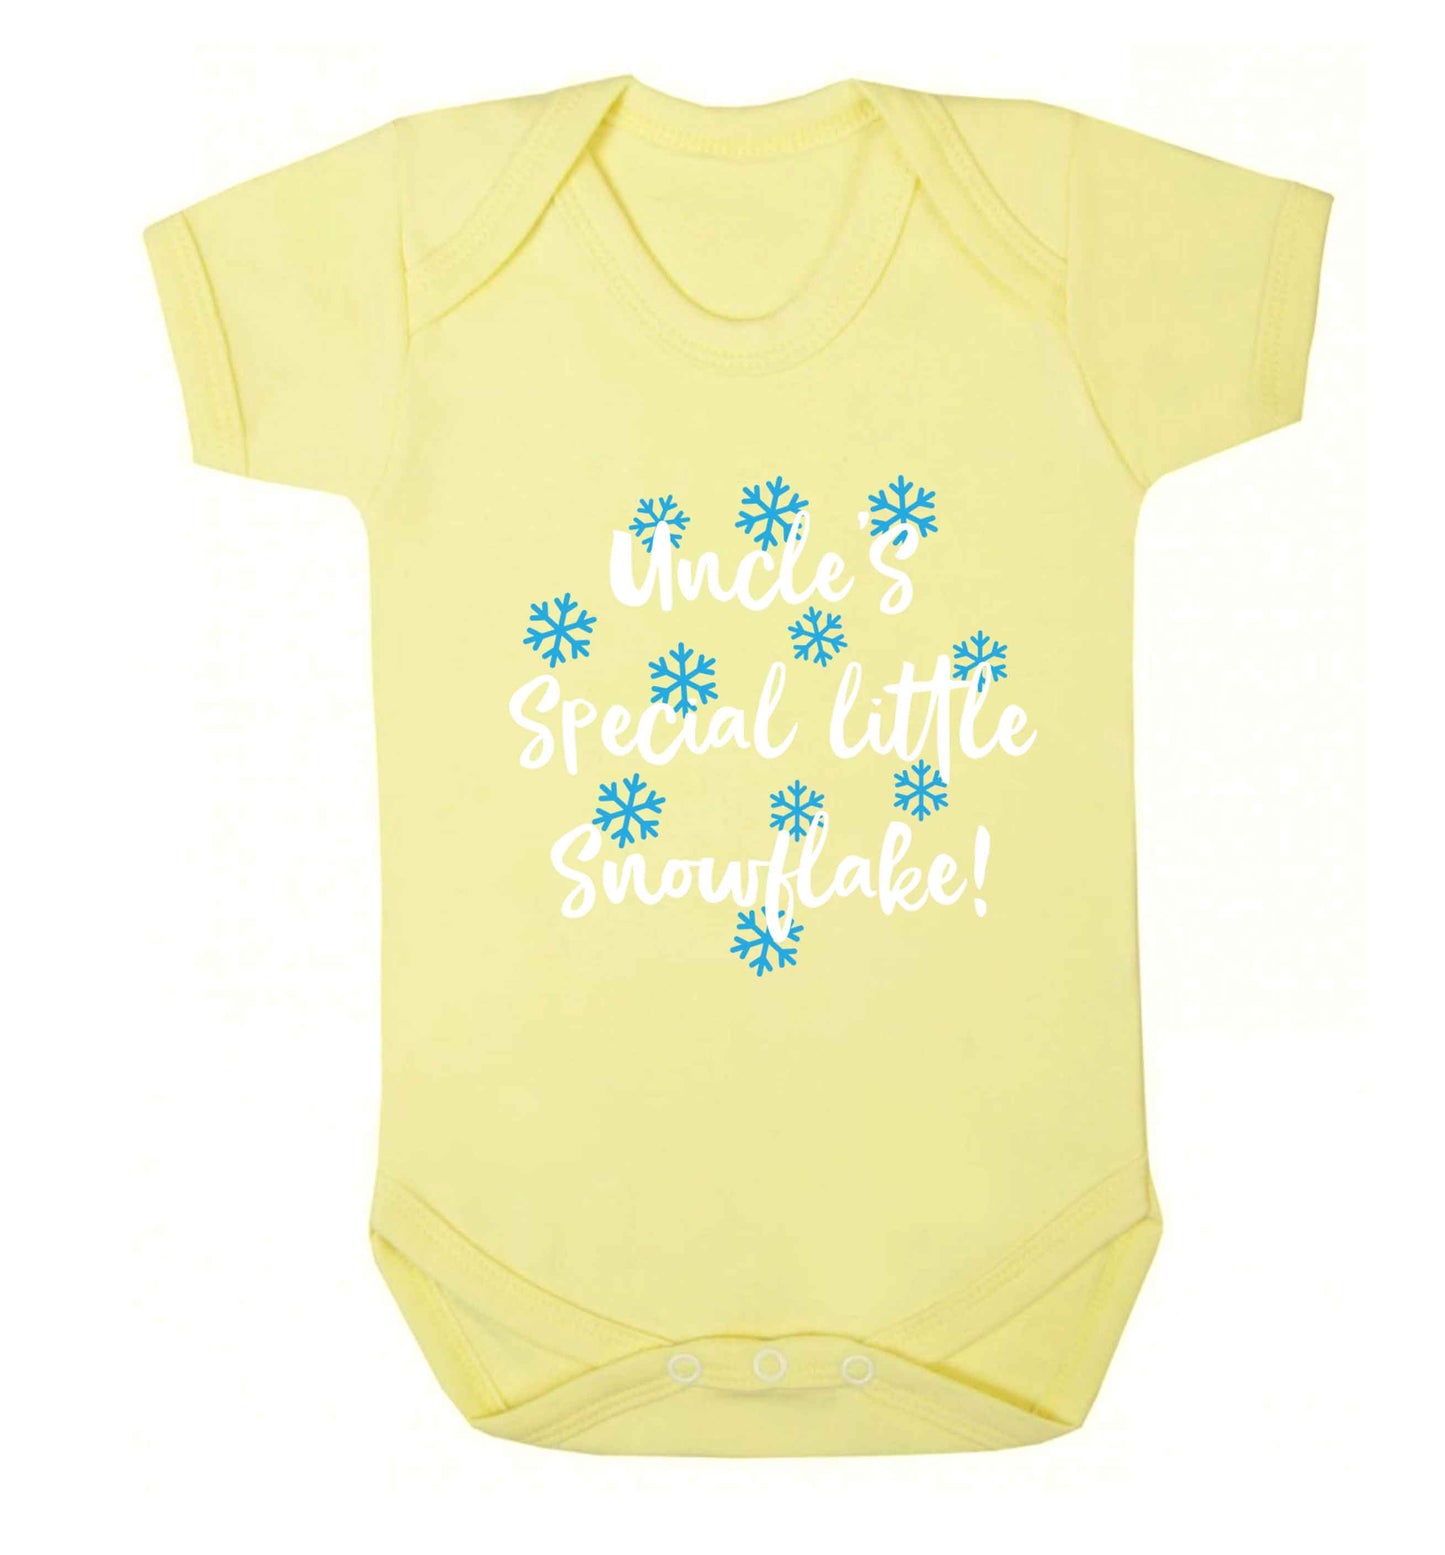 Uncle's special little snowflake Baby Vest pale yellow 18-24 months